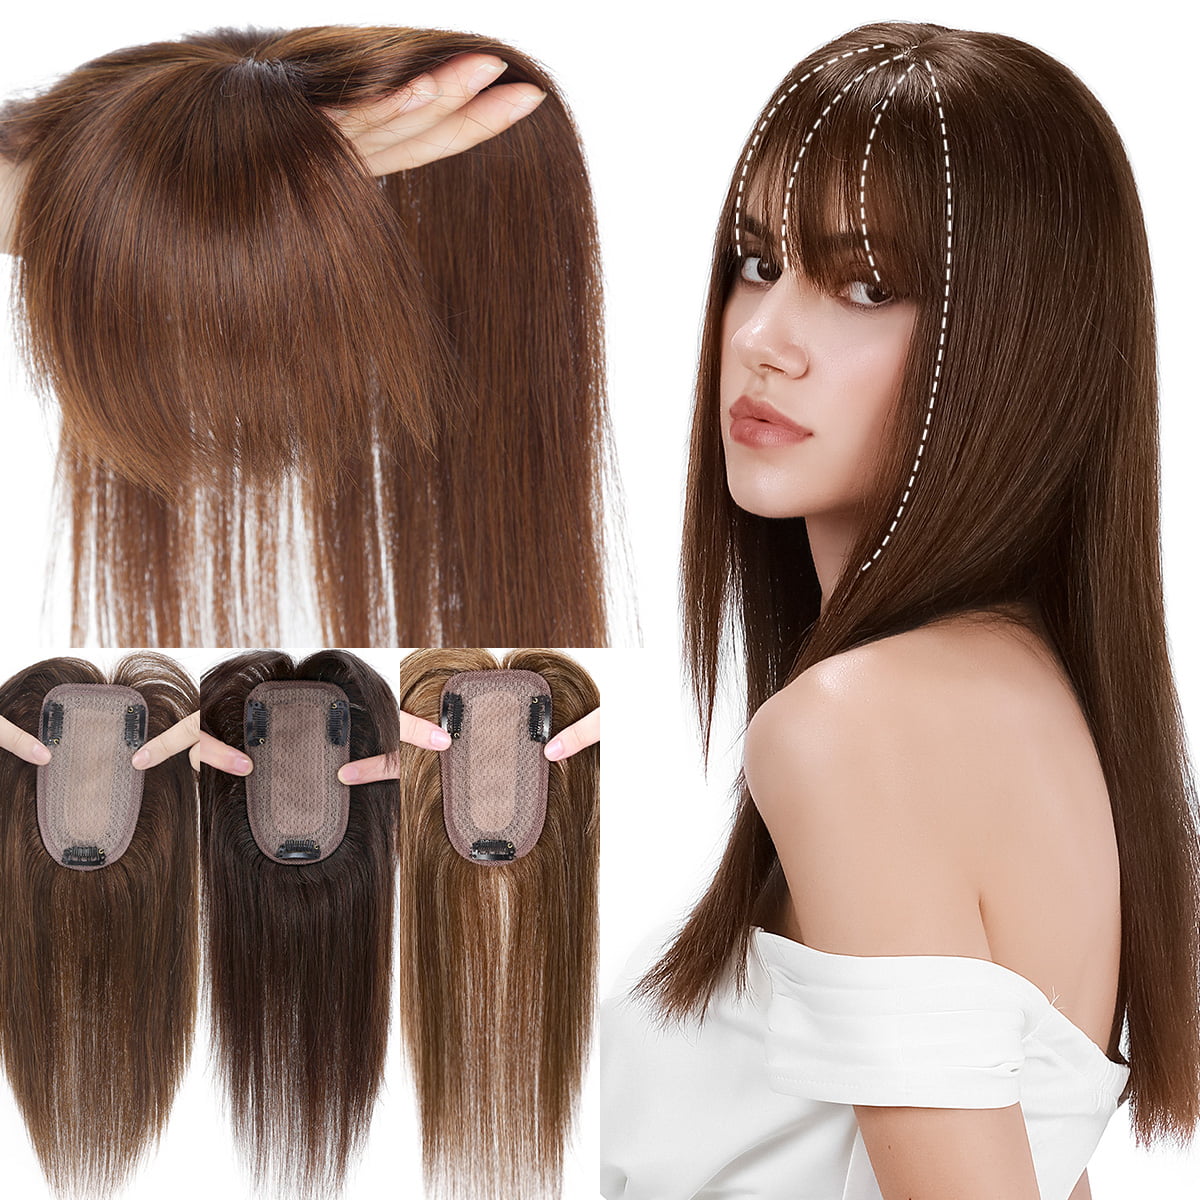 Real Hair Toppers Online Buying, Save 51% | jlcatj.gob.mx